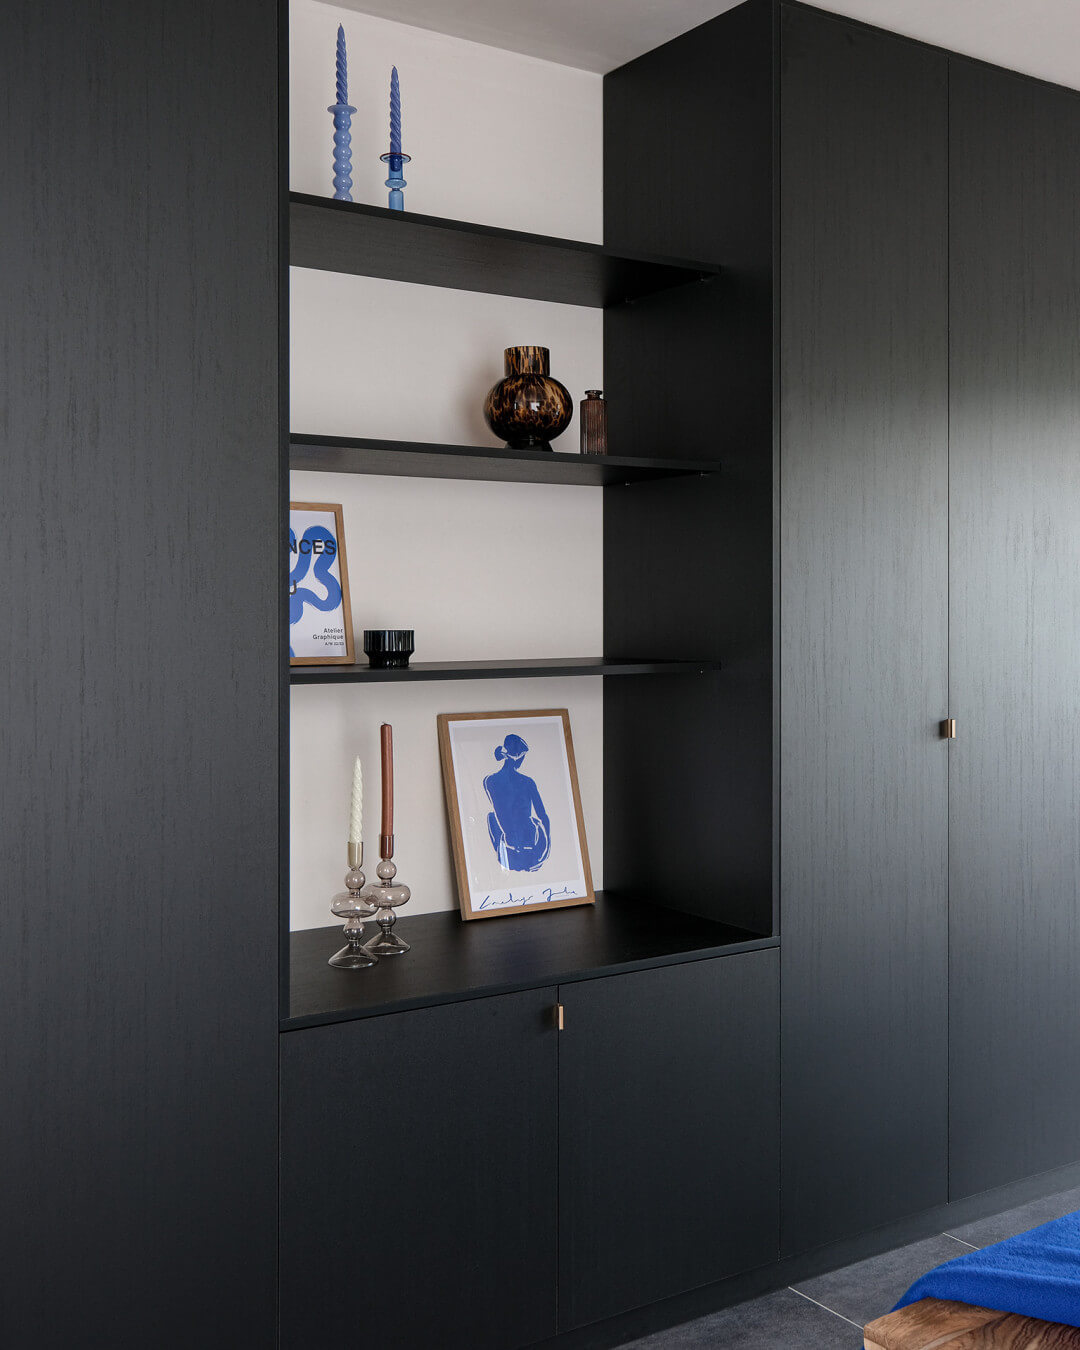 Wall unit combination with black wood structure from Maatkasten Online